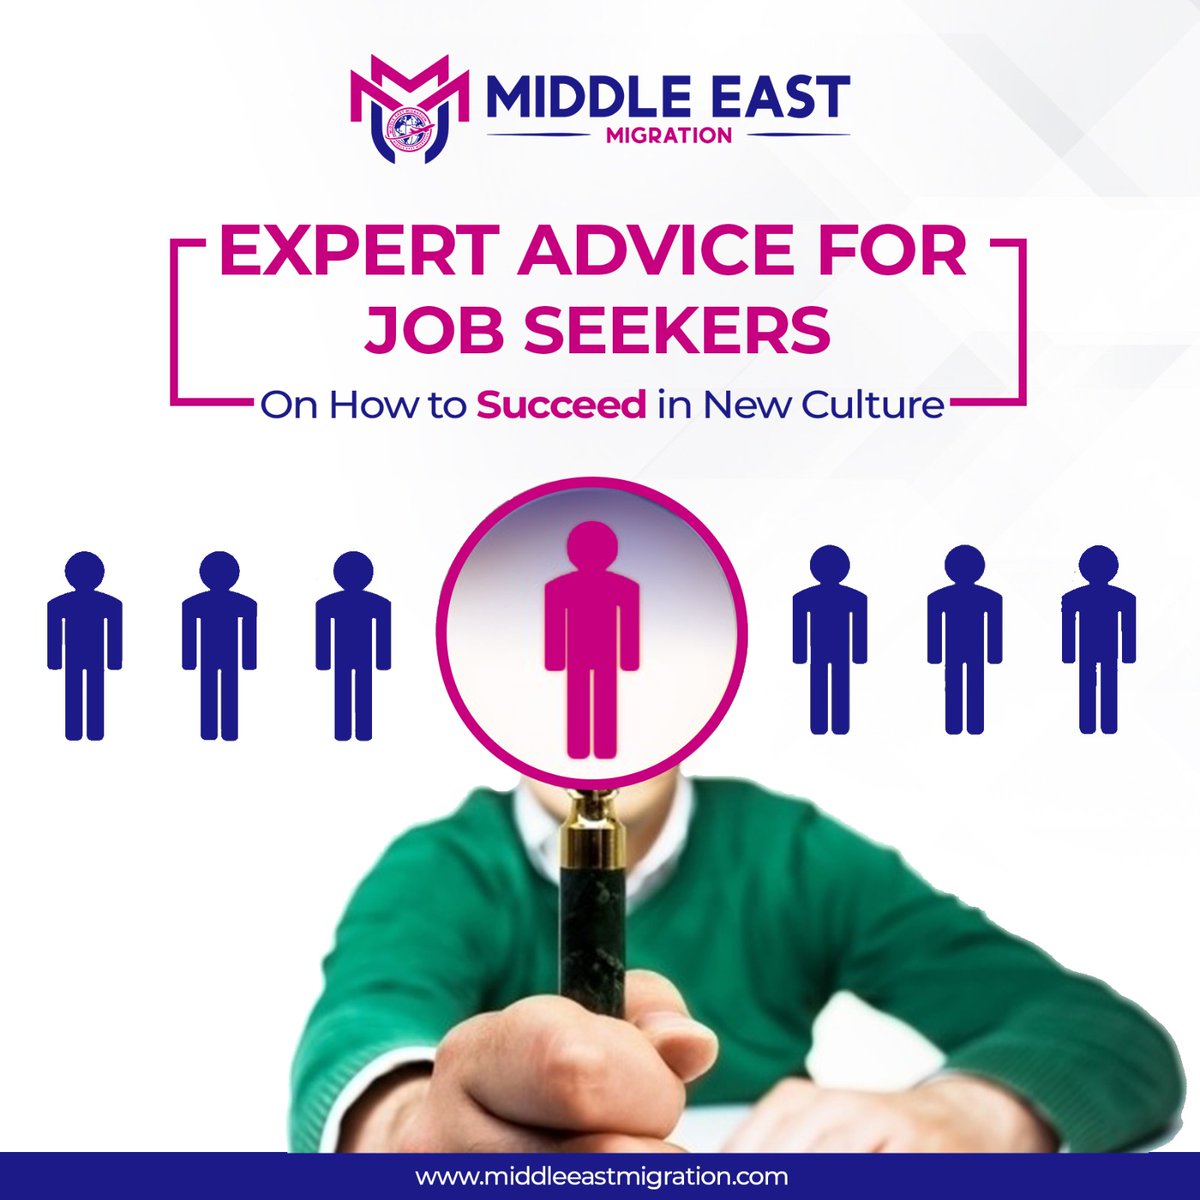 ✈️ Are you start on a new career journey in a different cultural setting? 🤝 
.
.
.
#middleeast #middleeastimmigration #immigration #abroadmigration #dubai #immigrationconsultants #immigrationservices #visaconsultants #jobs #workinabroad #abroadworkpermit